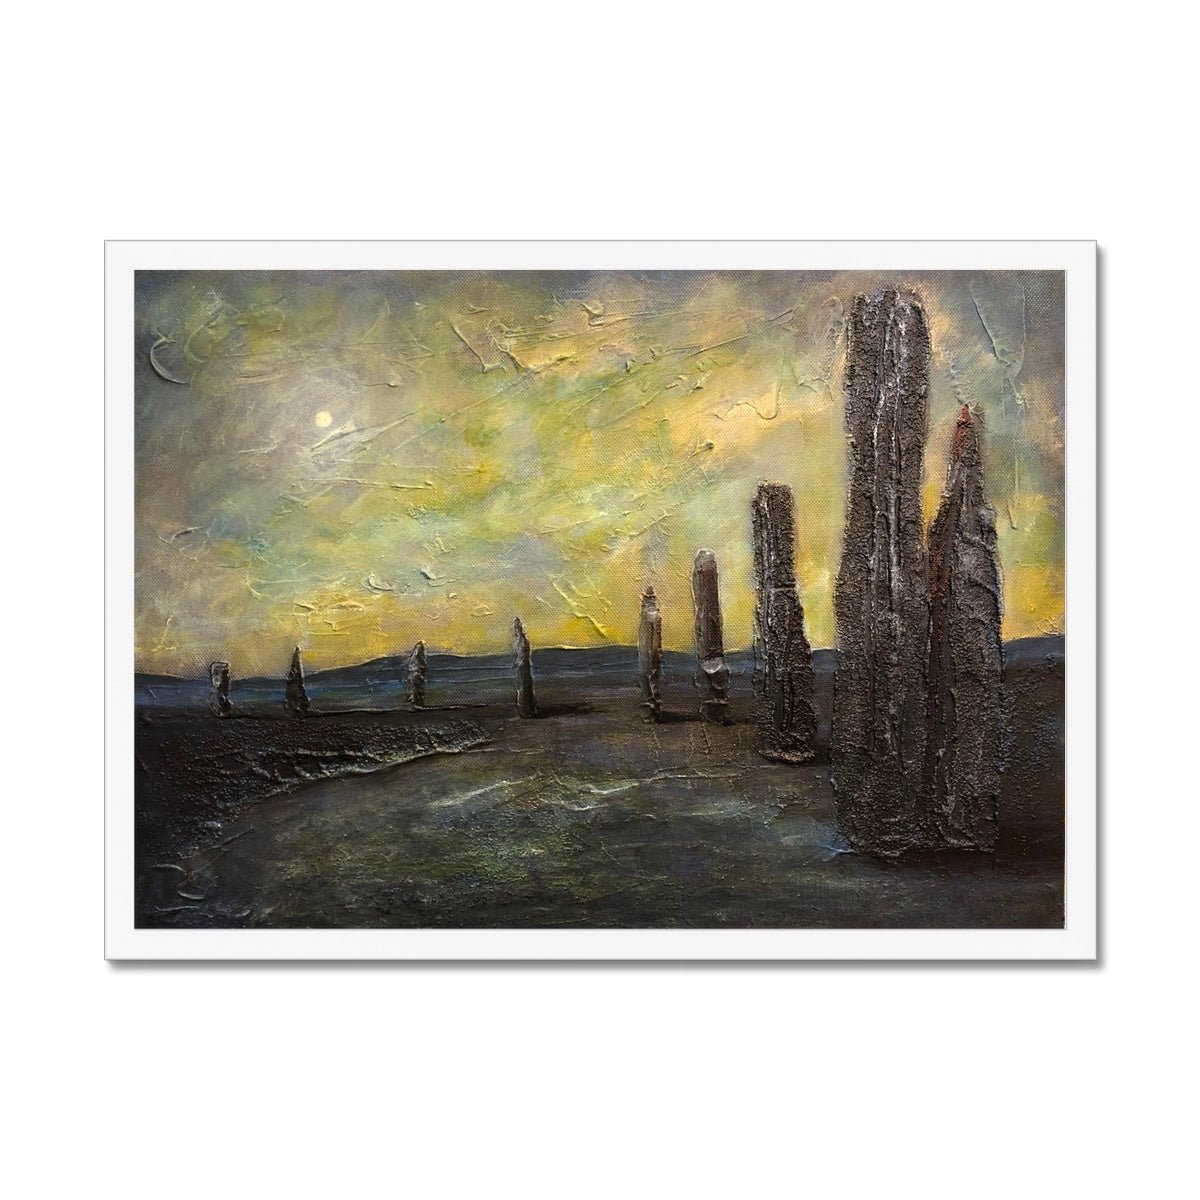 An Ethereal Ring Of Brodgar Orkney Painting | Framed Prints From Scotland-Framed Prints-Orkney Art Gallery-A2 Landscape-White Frame-Paintings, Prints, Homeware, Art Gifts From Scotland By Scottish Artist Kevin Hunter